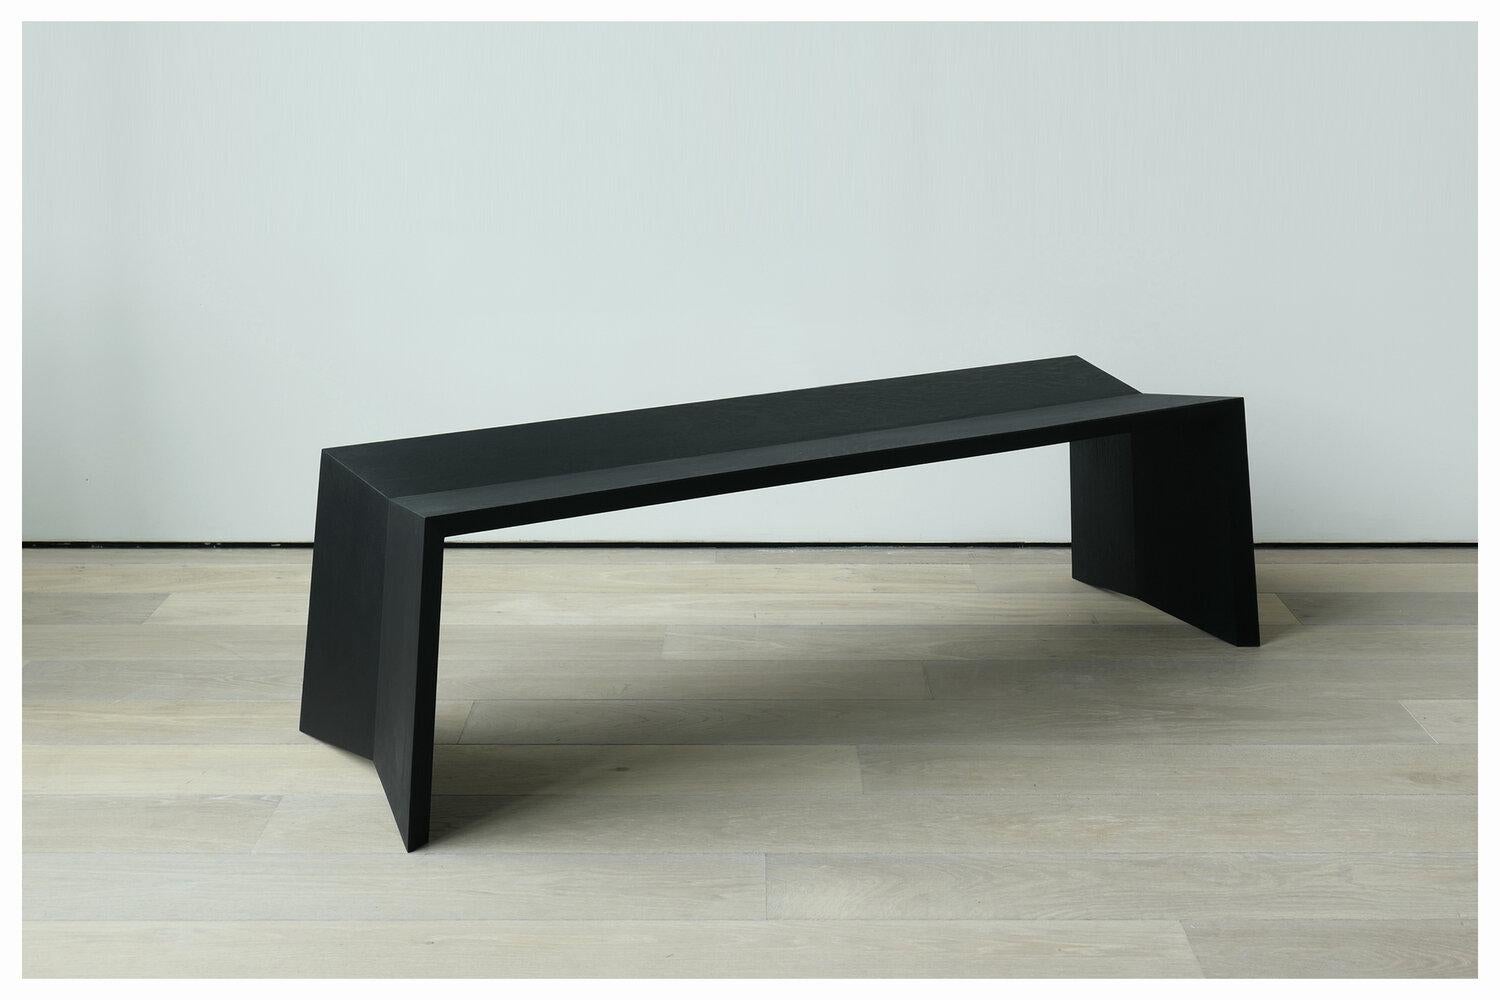 THIS PIECE IS BEING SOLD AS A SAMPLE. PLEASE MESSAGE US FOR MORE INFORMATION OR ANY QUESTIONS. WE MAY HAVE MORE THAN ONE AVAILABLE.

Originally designed as a museum bench, Muse is constructed in a continuous V-shape that supplies both its structure